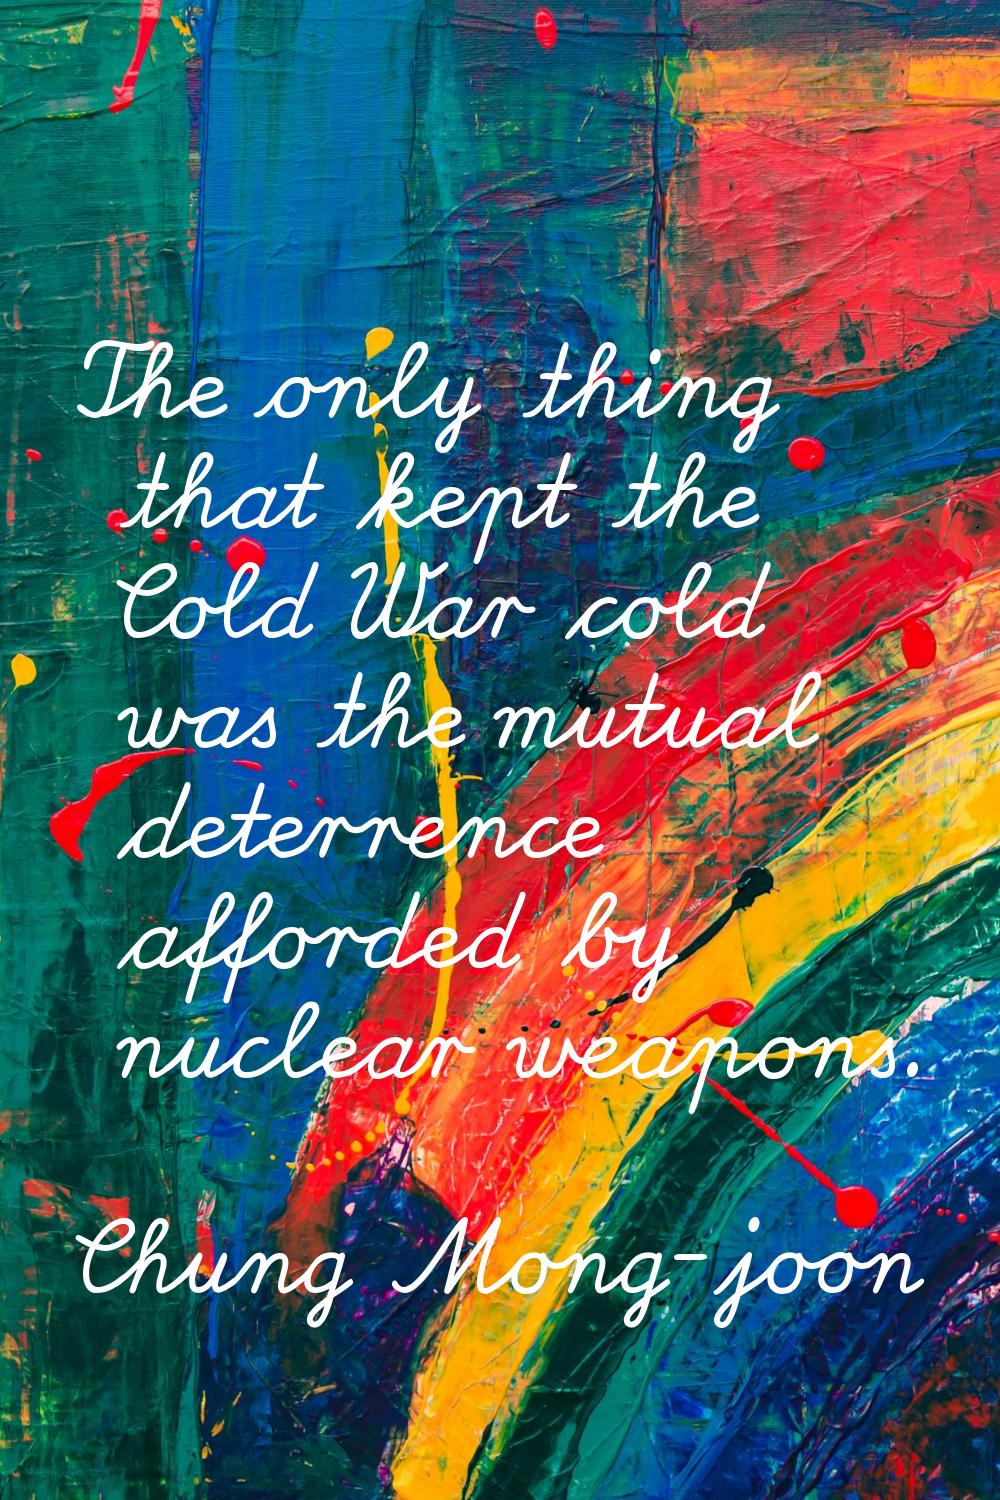 The only thing that kept the Cold War cold was the mutual deterrence afforded by nuclear weapons.